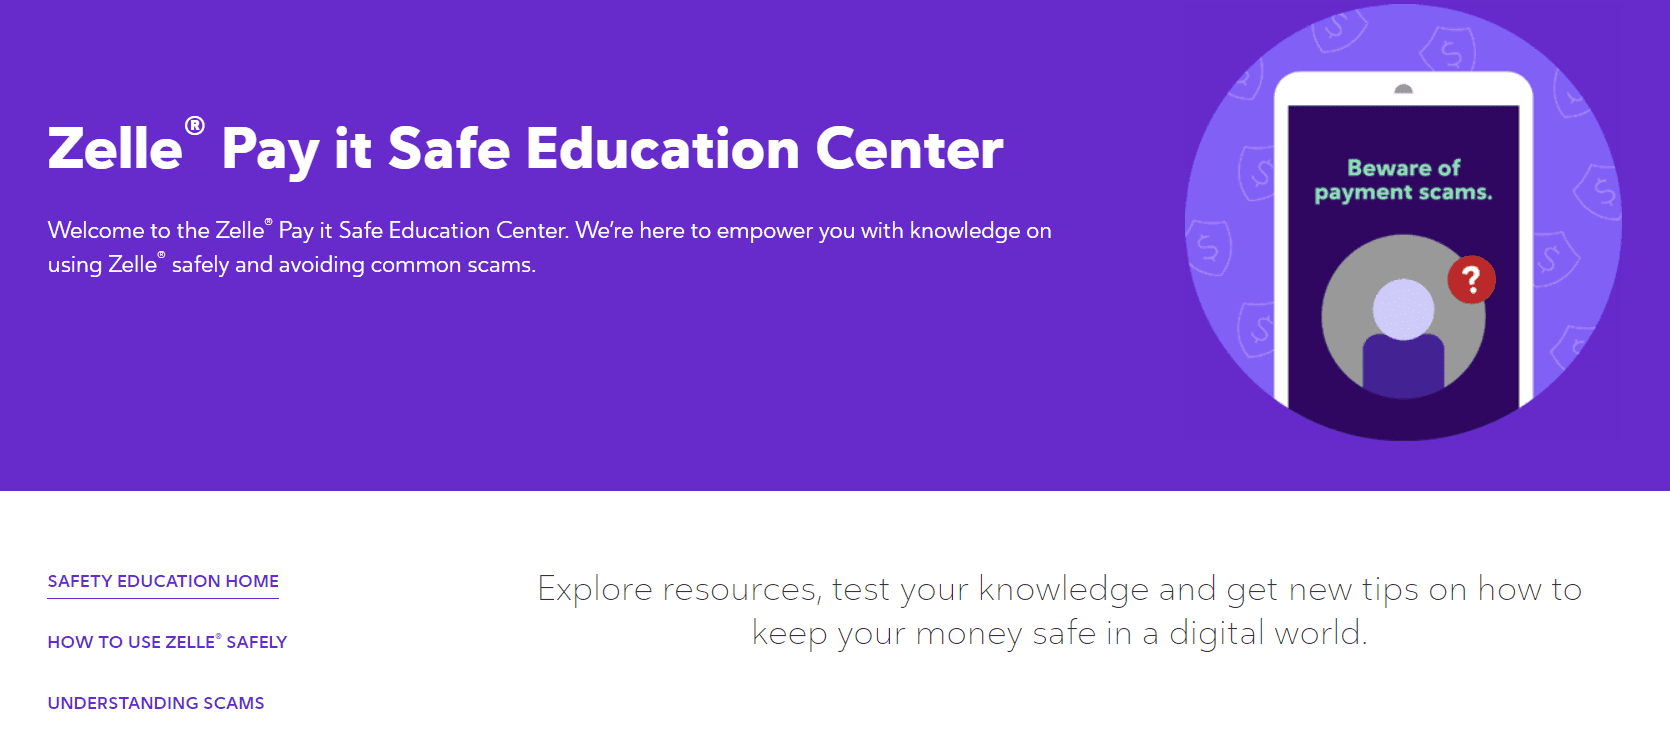 Zelle's education center full of how-tos and guides for users.